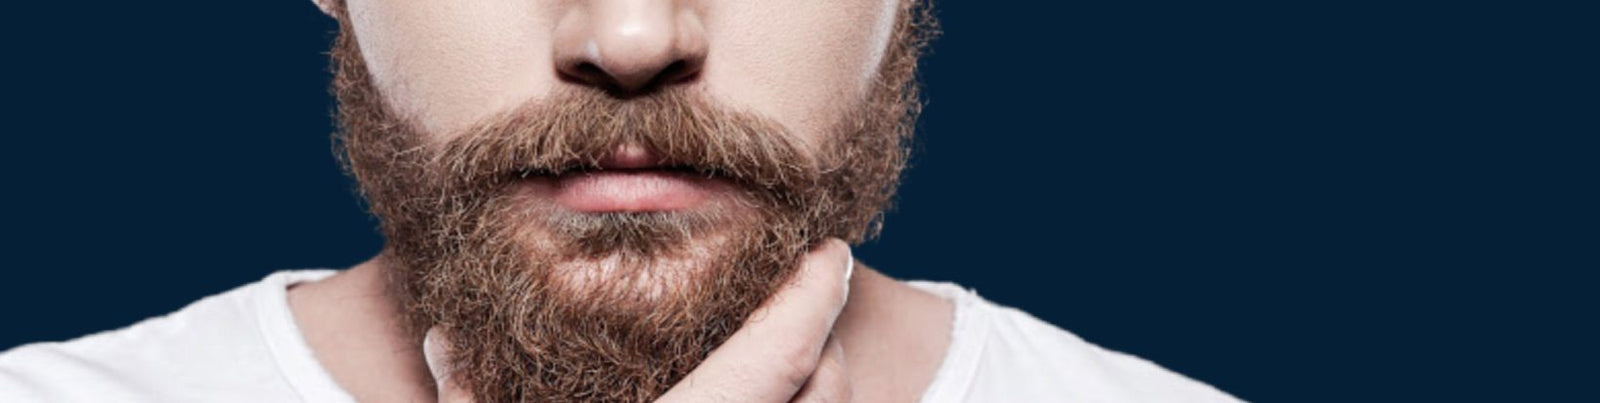 New Year, New Beard: Tips for Starting Your 2021 Beard Care Routine